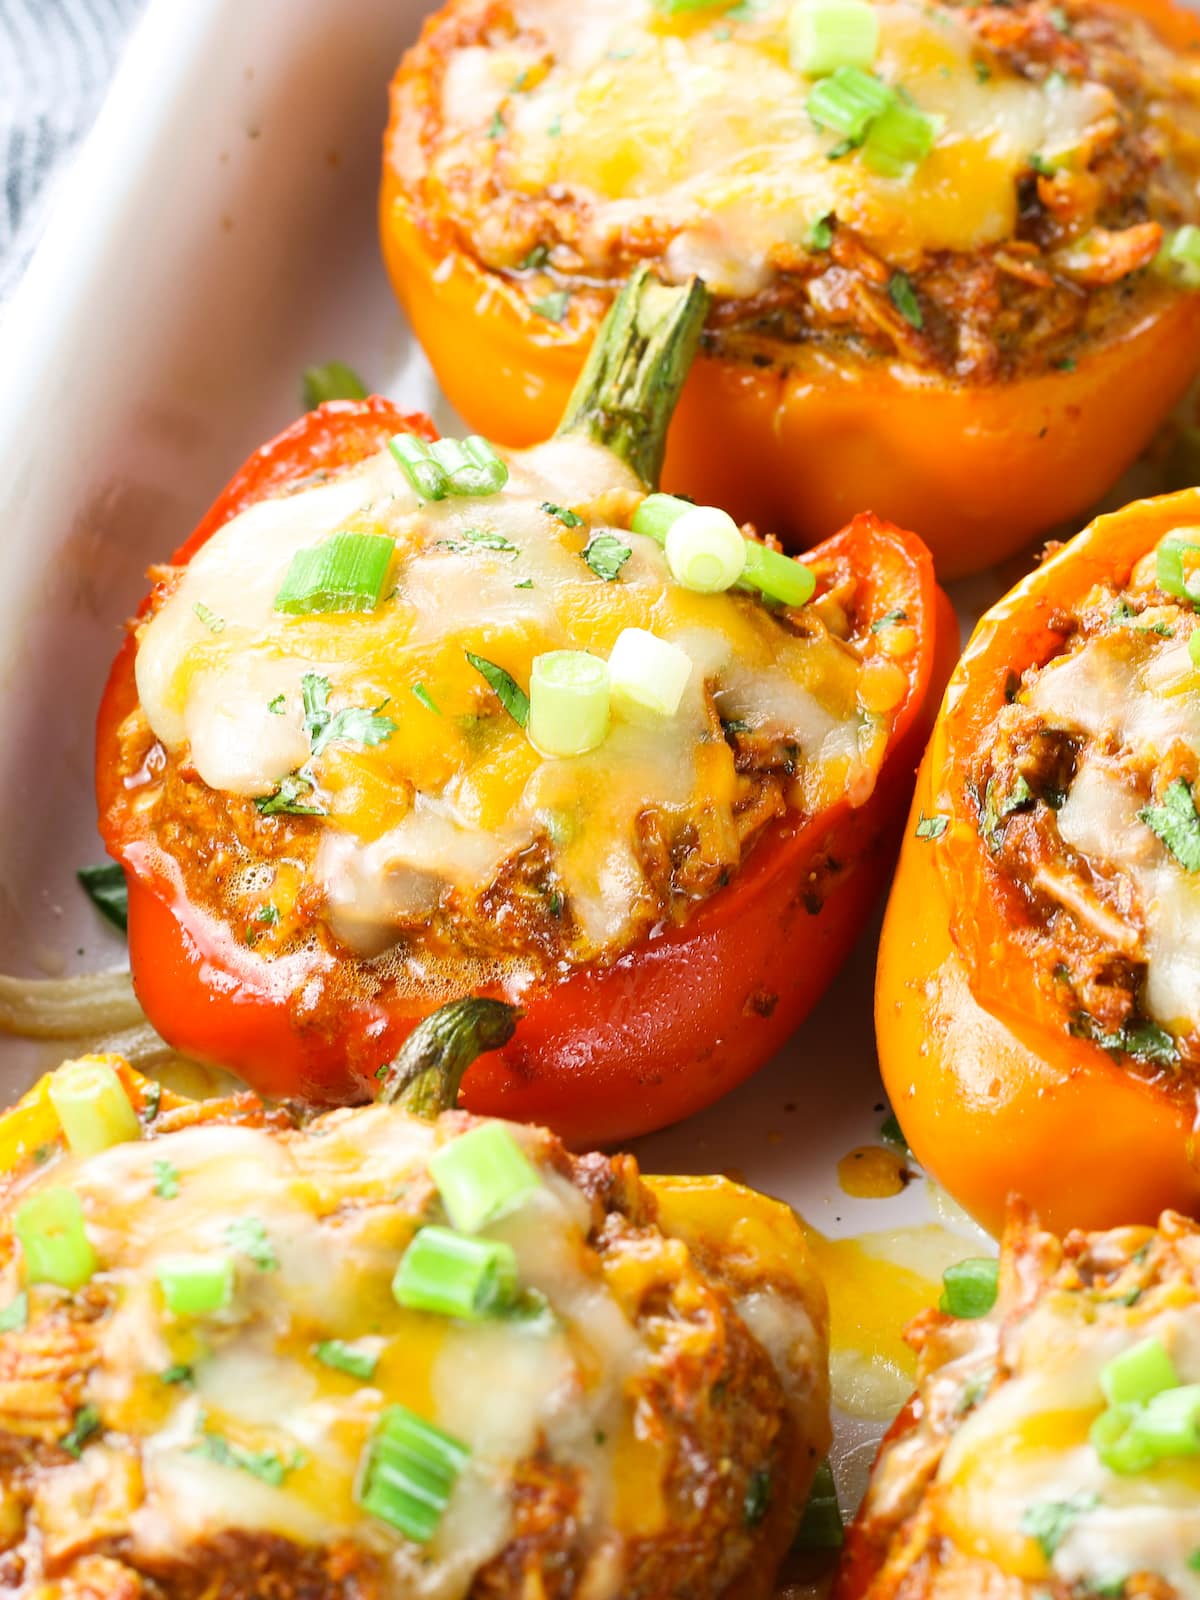 Stuffed peppers cooked topped with melted cheese and sliced green onions.